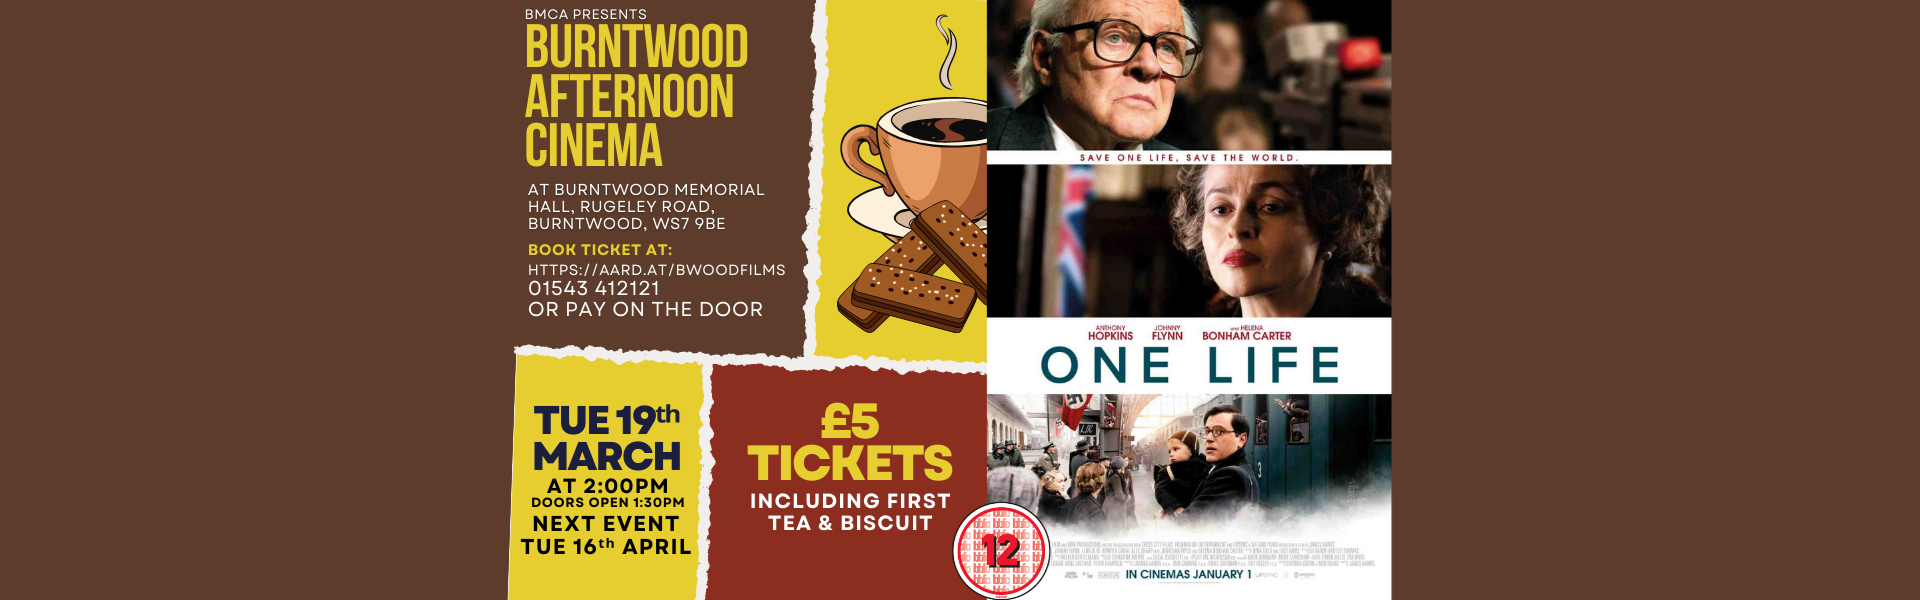 Burntwood Afternoon Cinema - One Life